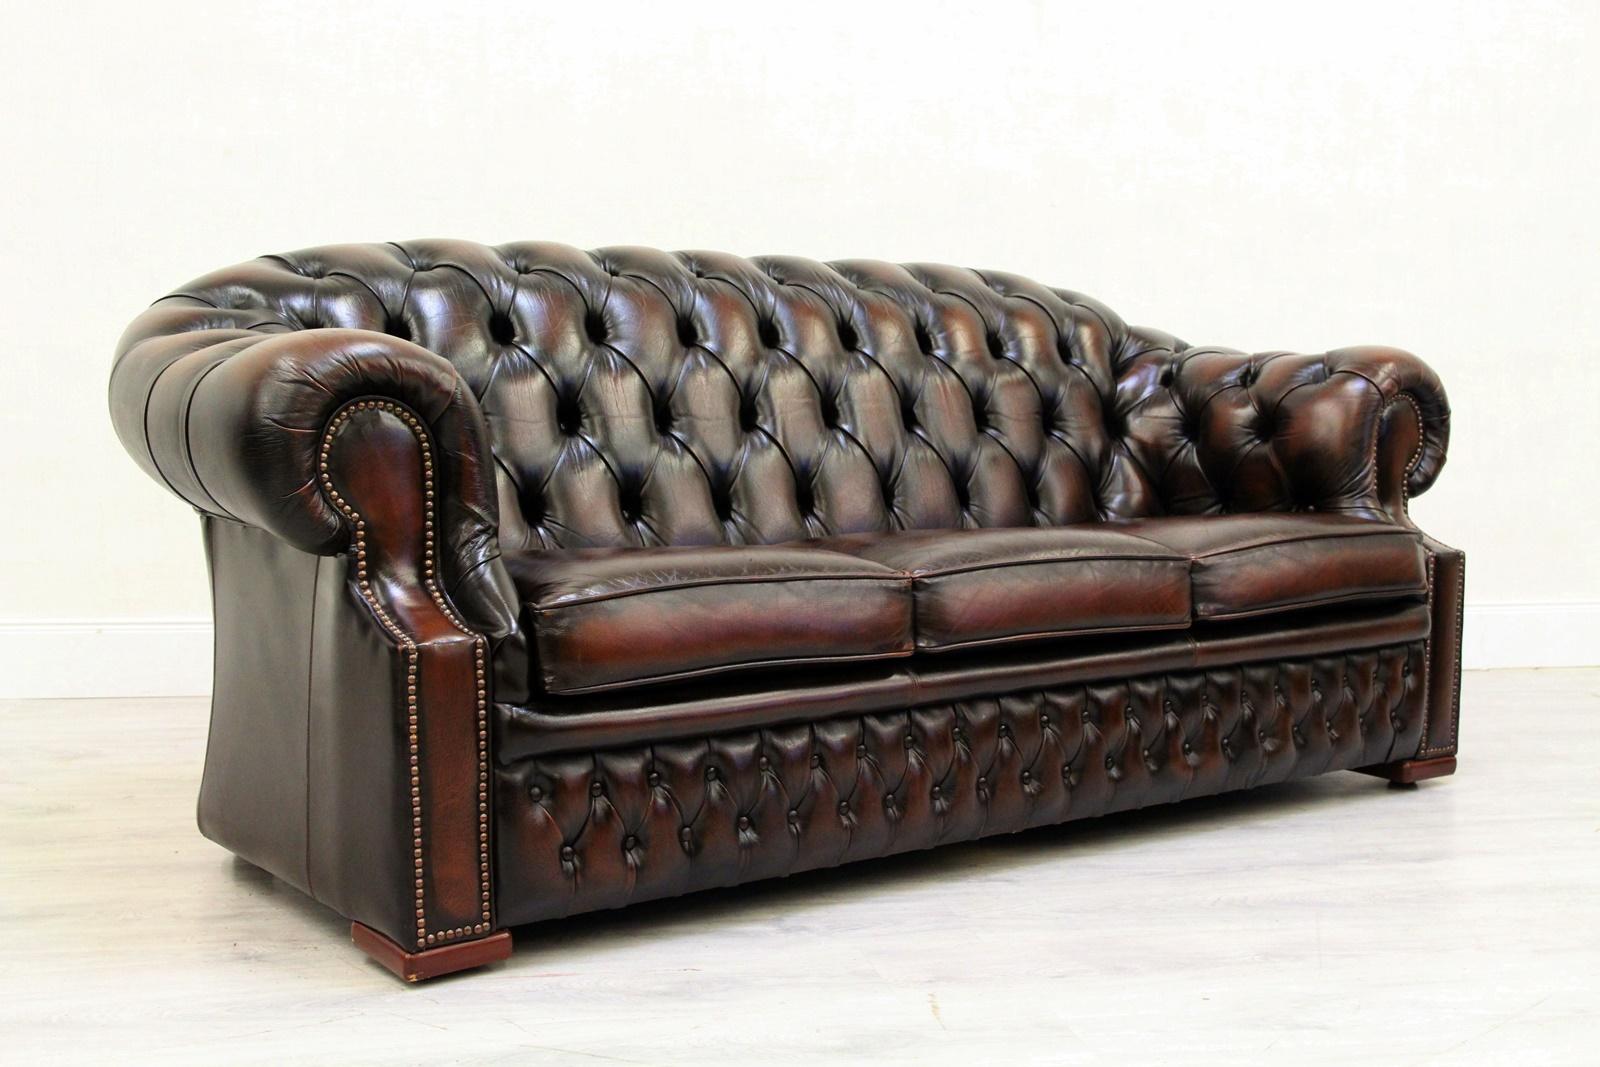 Chesterfield Centurion Sofa Leather Antique Vintage Couch English For Sale 1